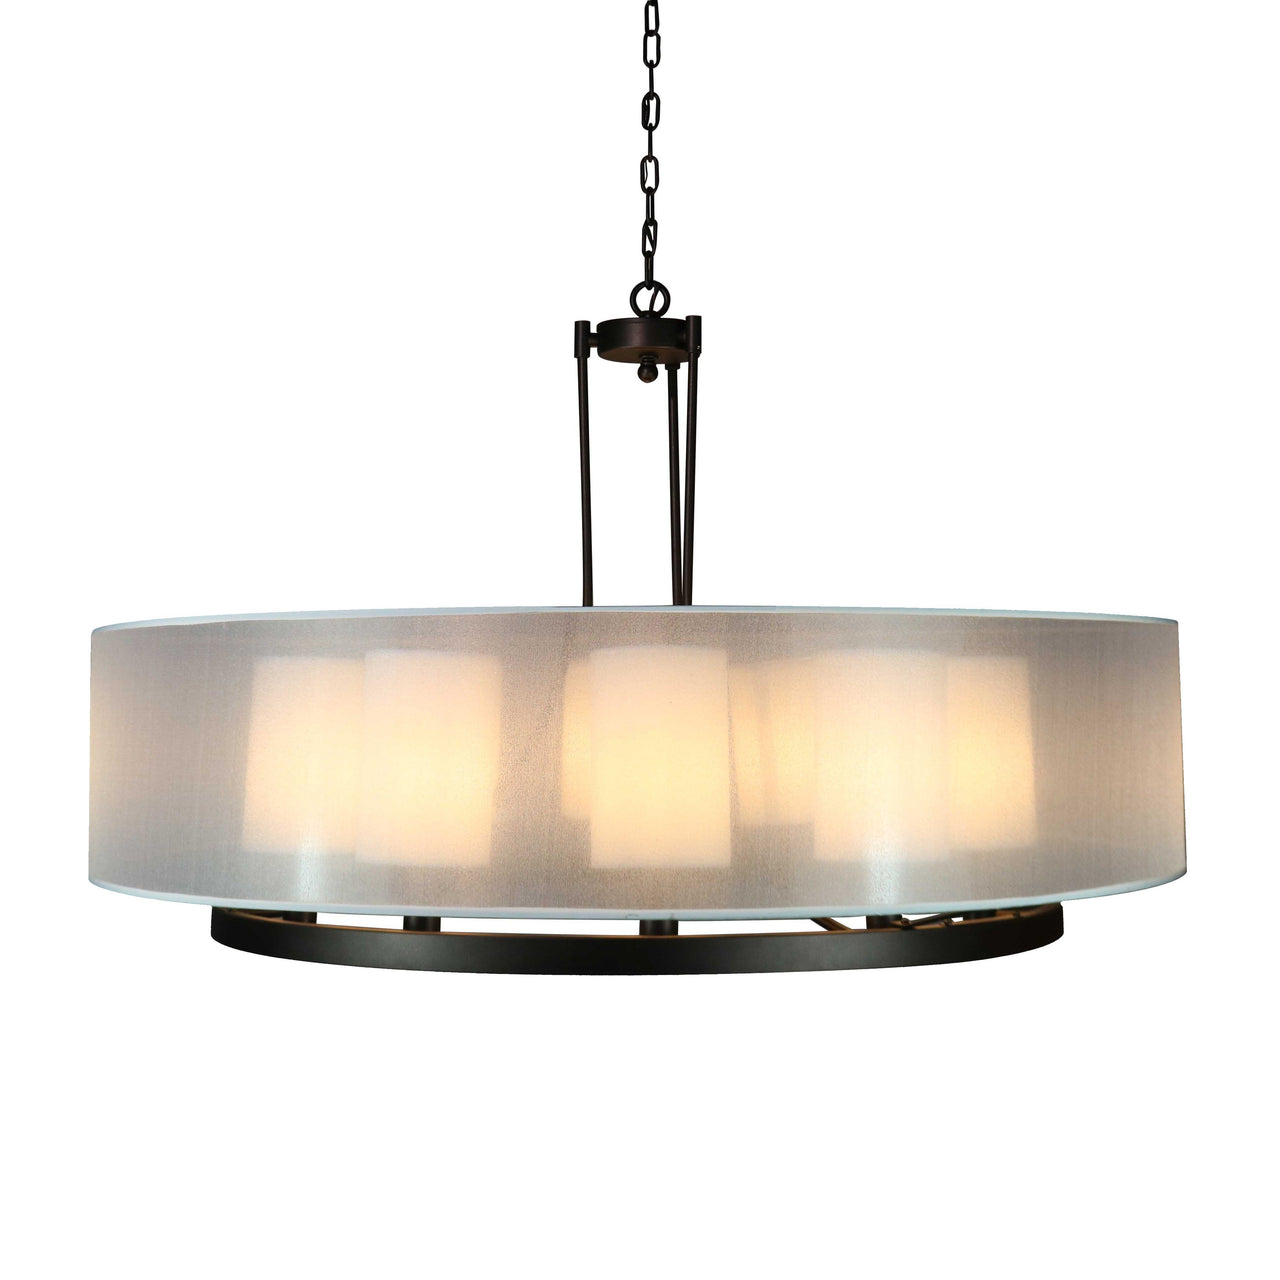 Fresno Modern Drum Chandelier Overhead Light Fixture with 10 Light Bulb Support and White Fabric Shade, Beautiful Hanging Lighting for Foyer, Living or Dining Room Use Chandeliers Canyon Home 